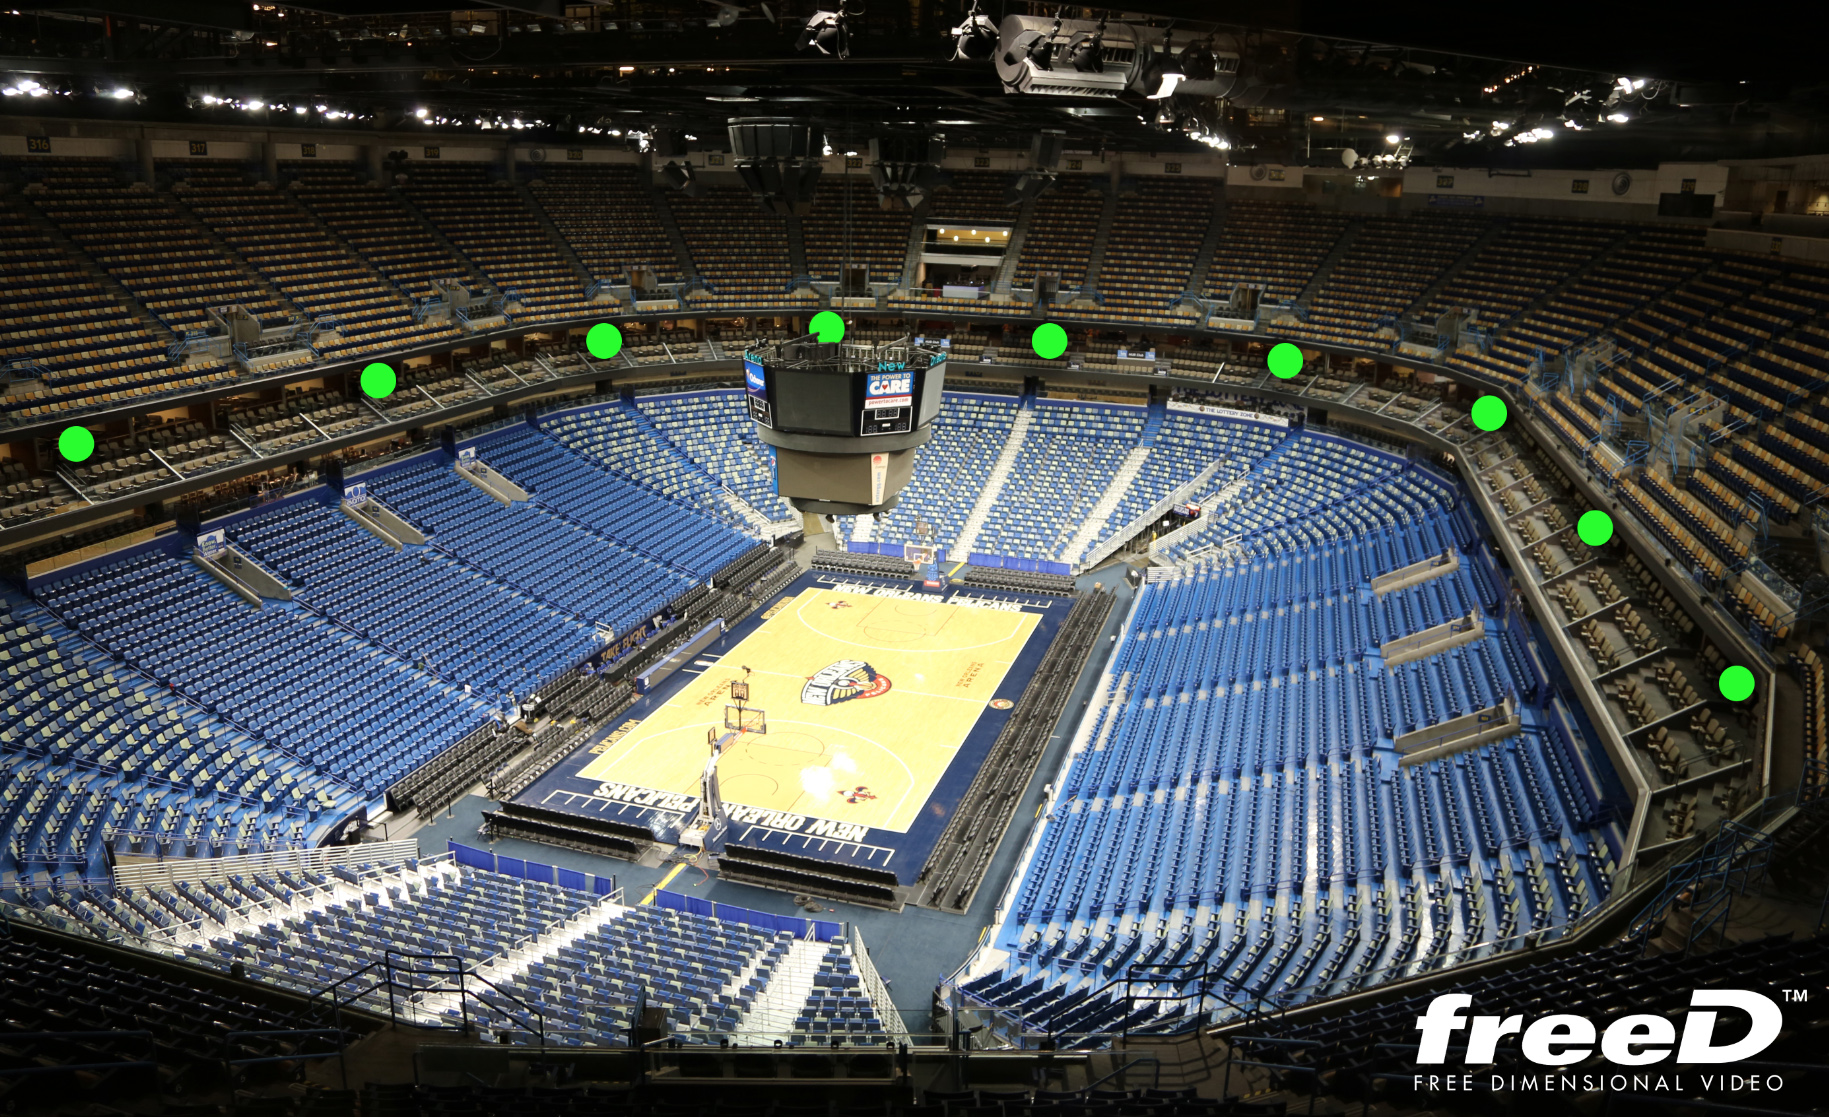 freeD camera locations inside Smoothie King Center